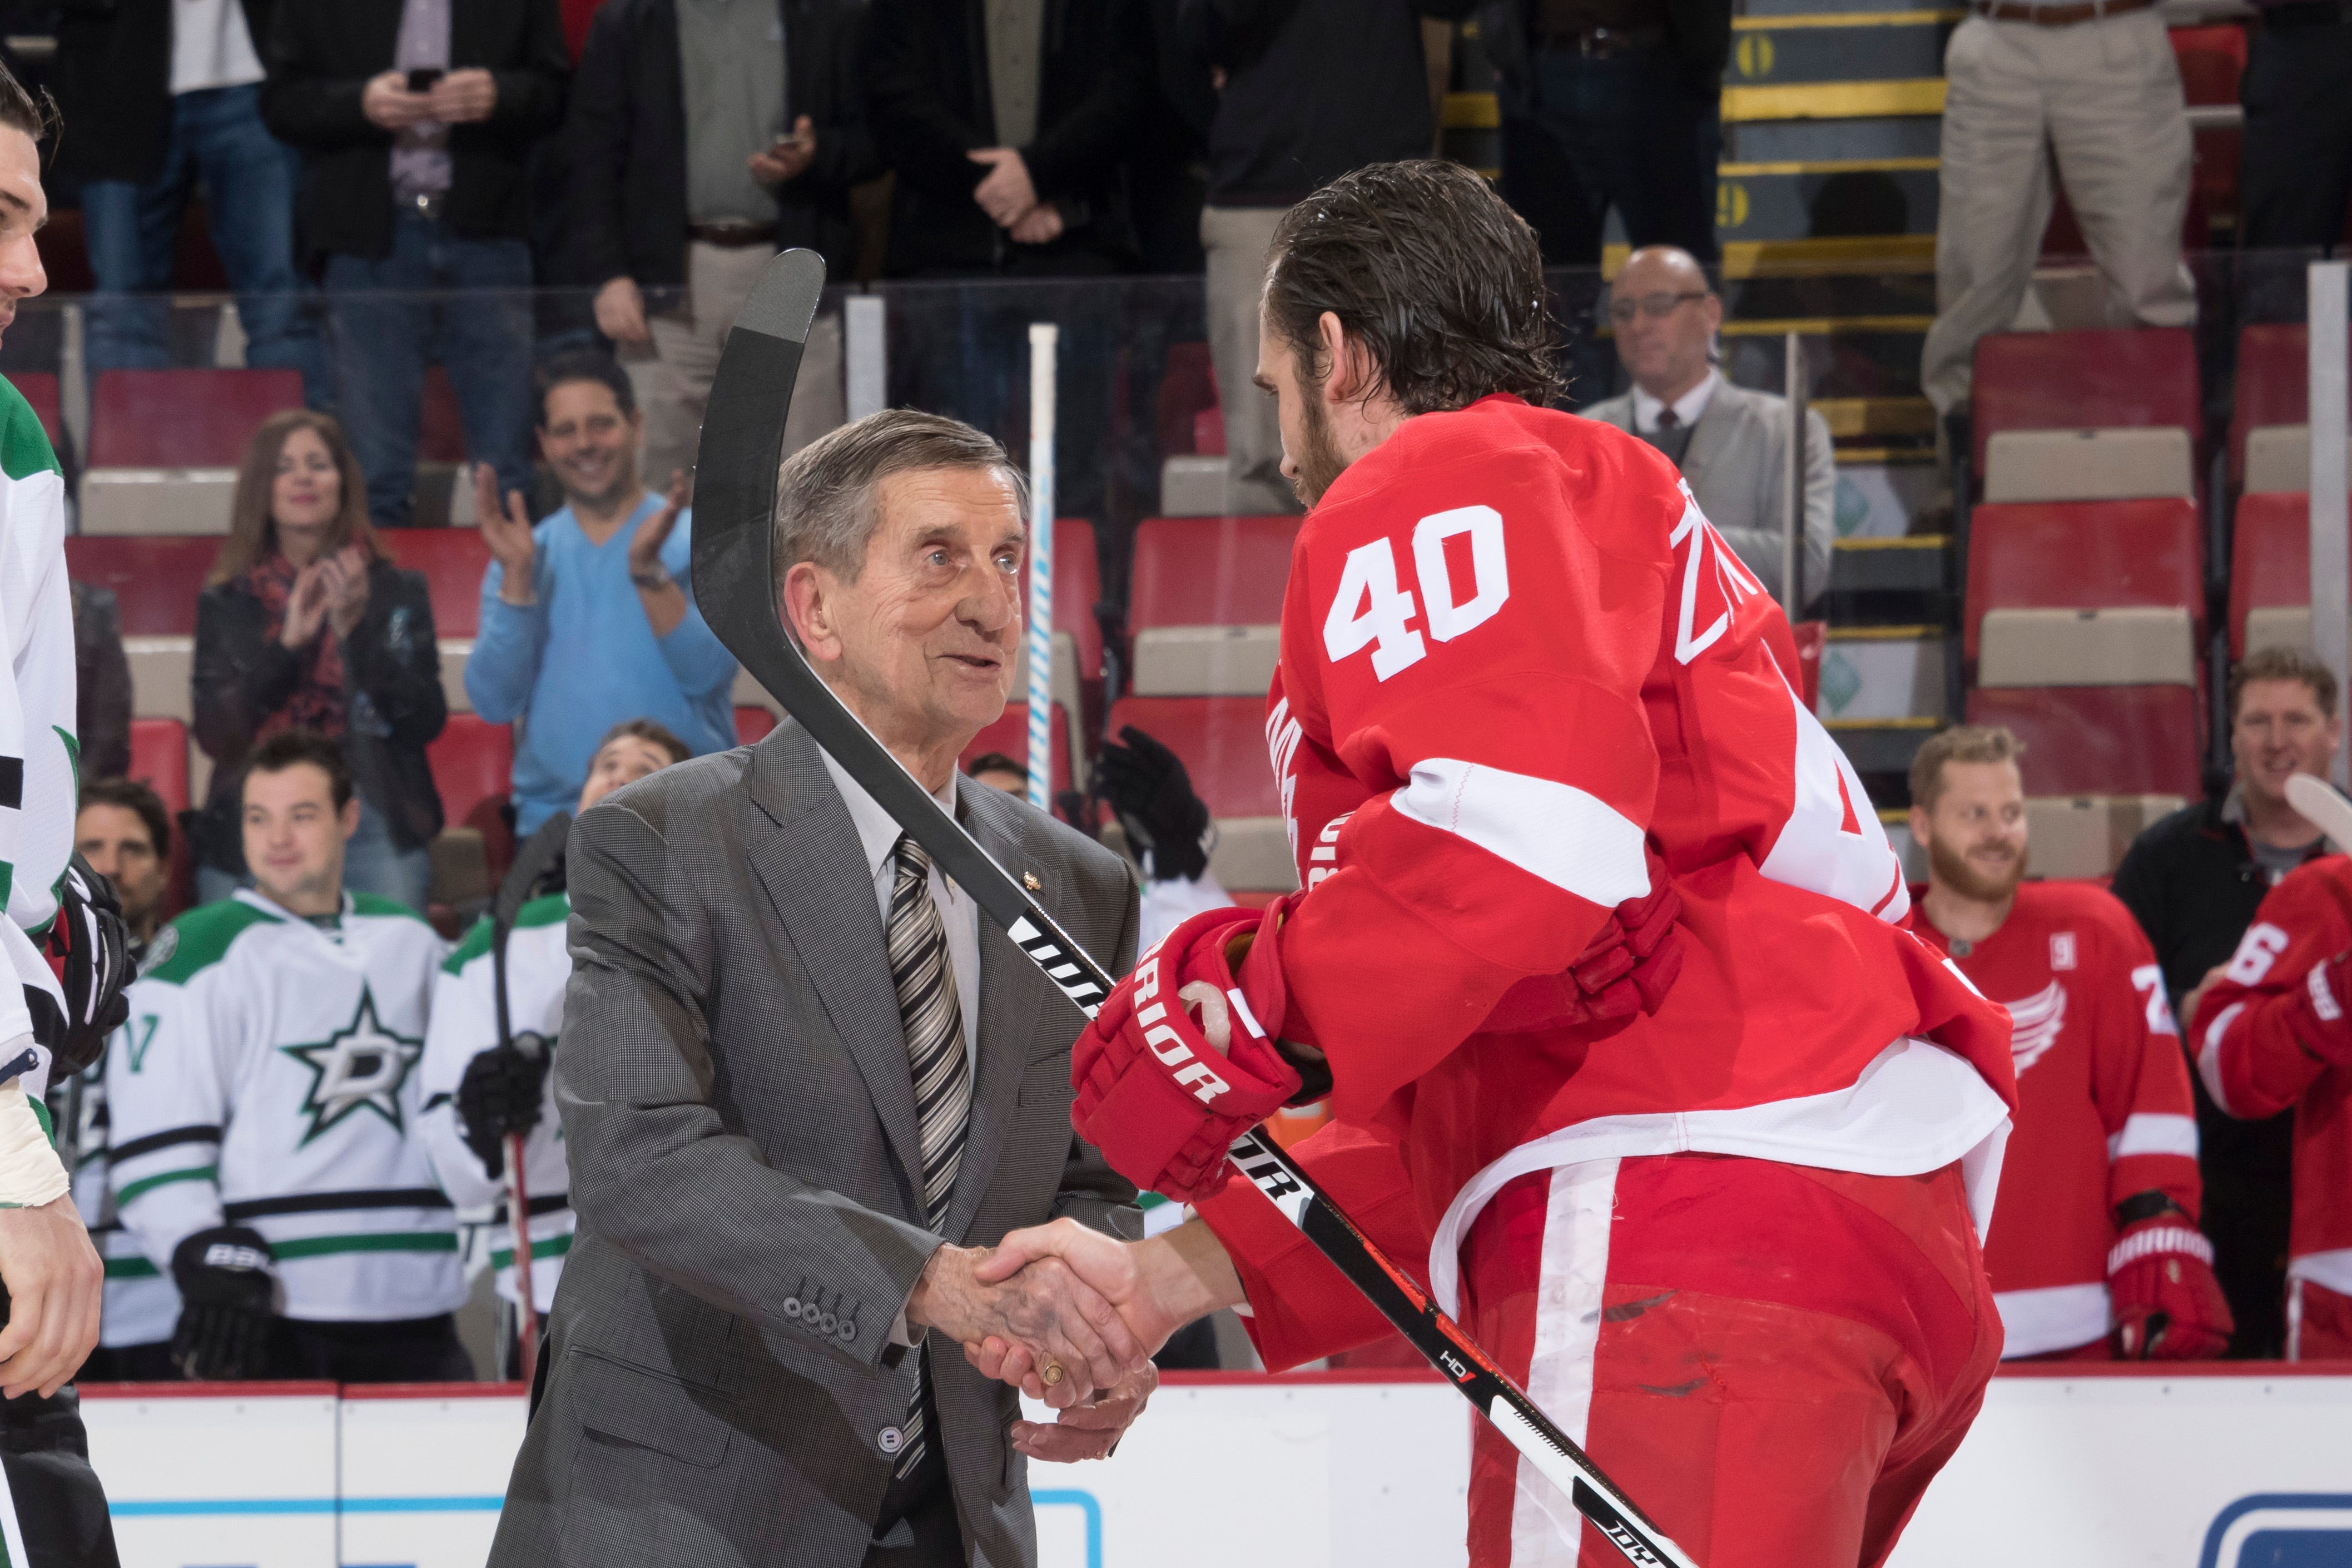 Red Wing Hall of Famer Ted Lindsay shakes hands with Henrik Zetterberg after performing a ceremonial puck drop.